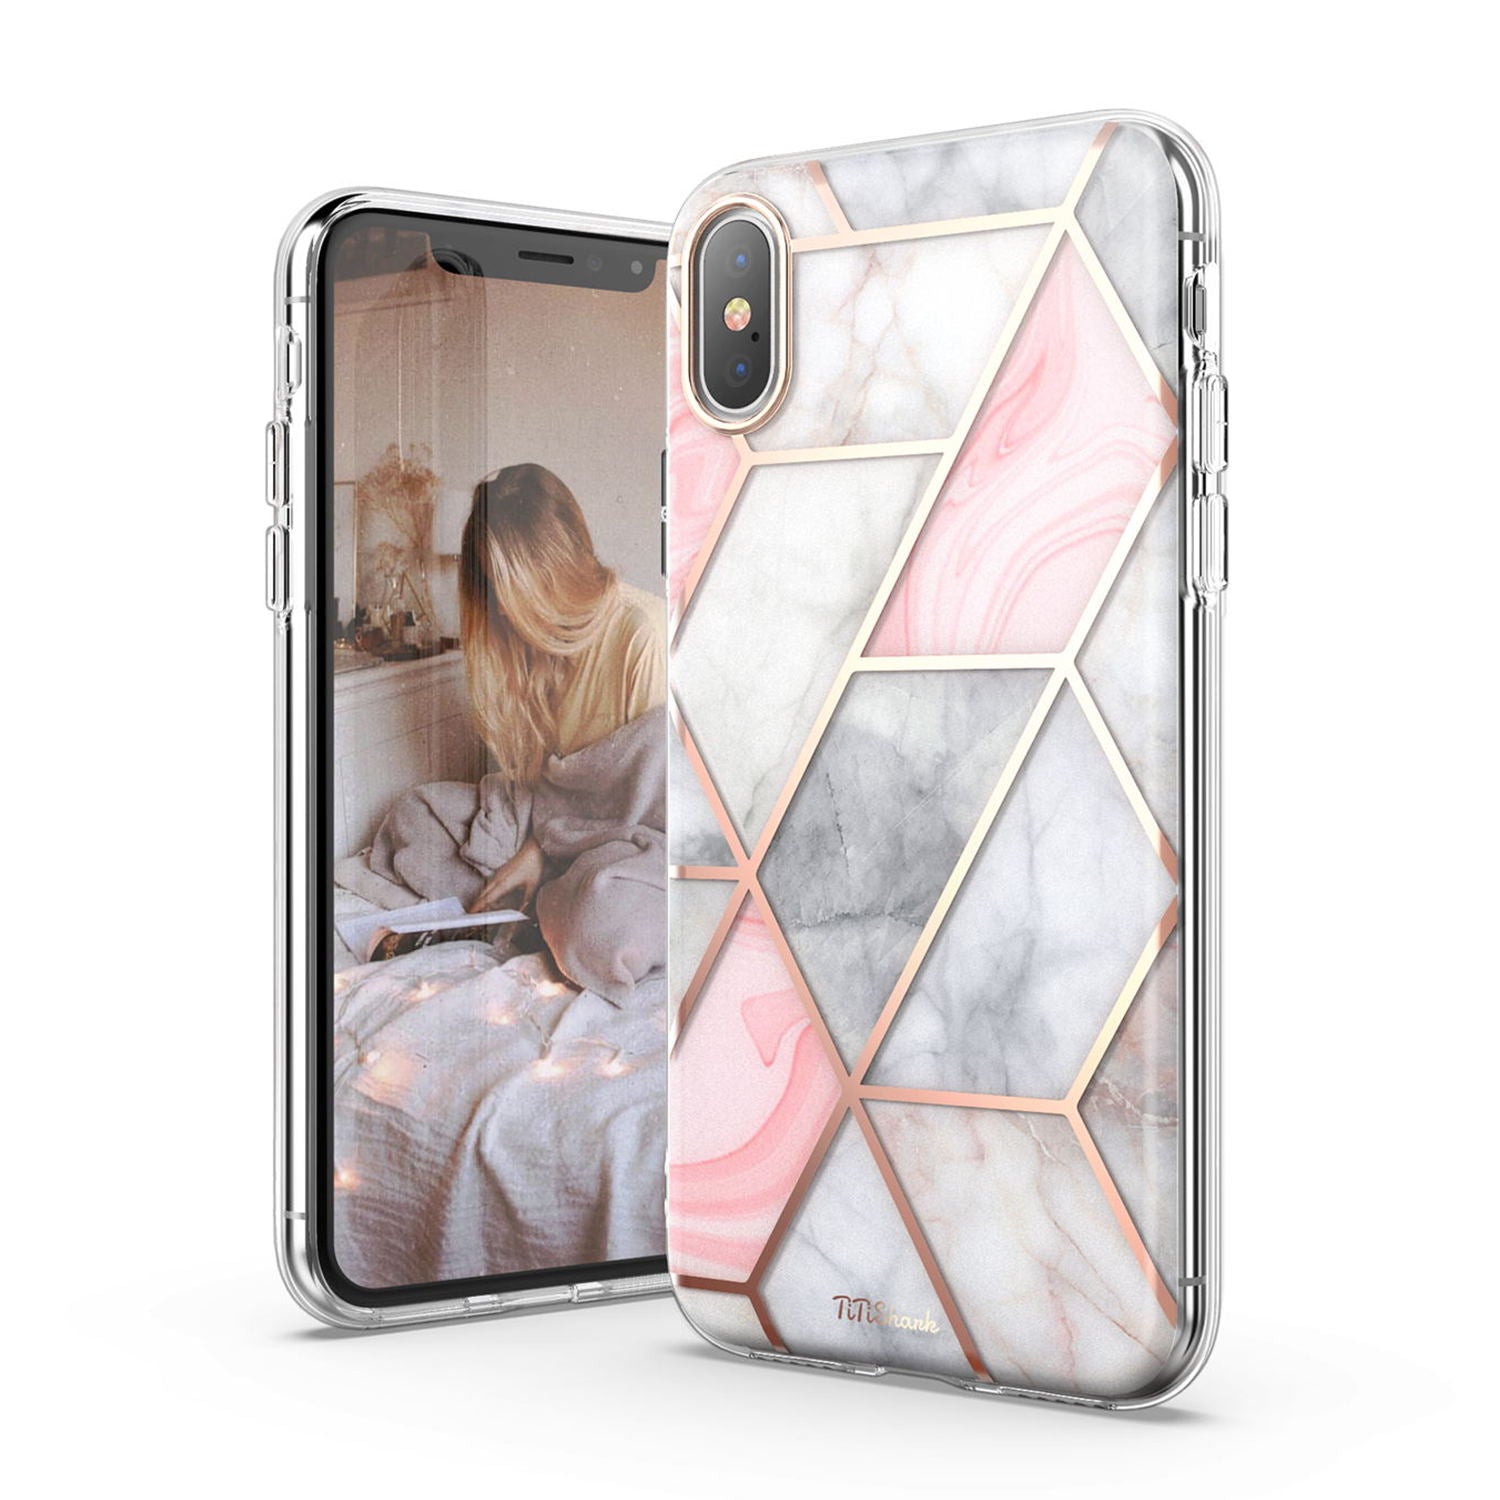 TiTiShark For iPhone X/XS Case Clear Marble Shockproof Case-Pink